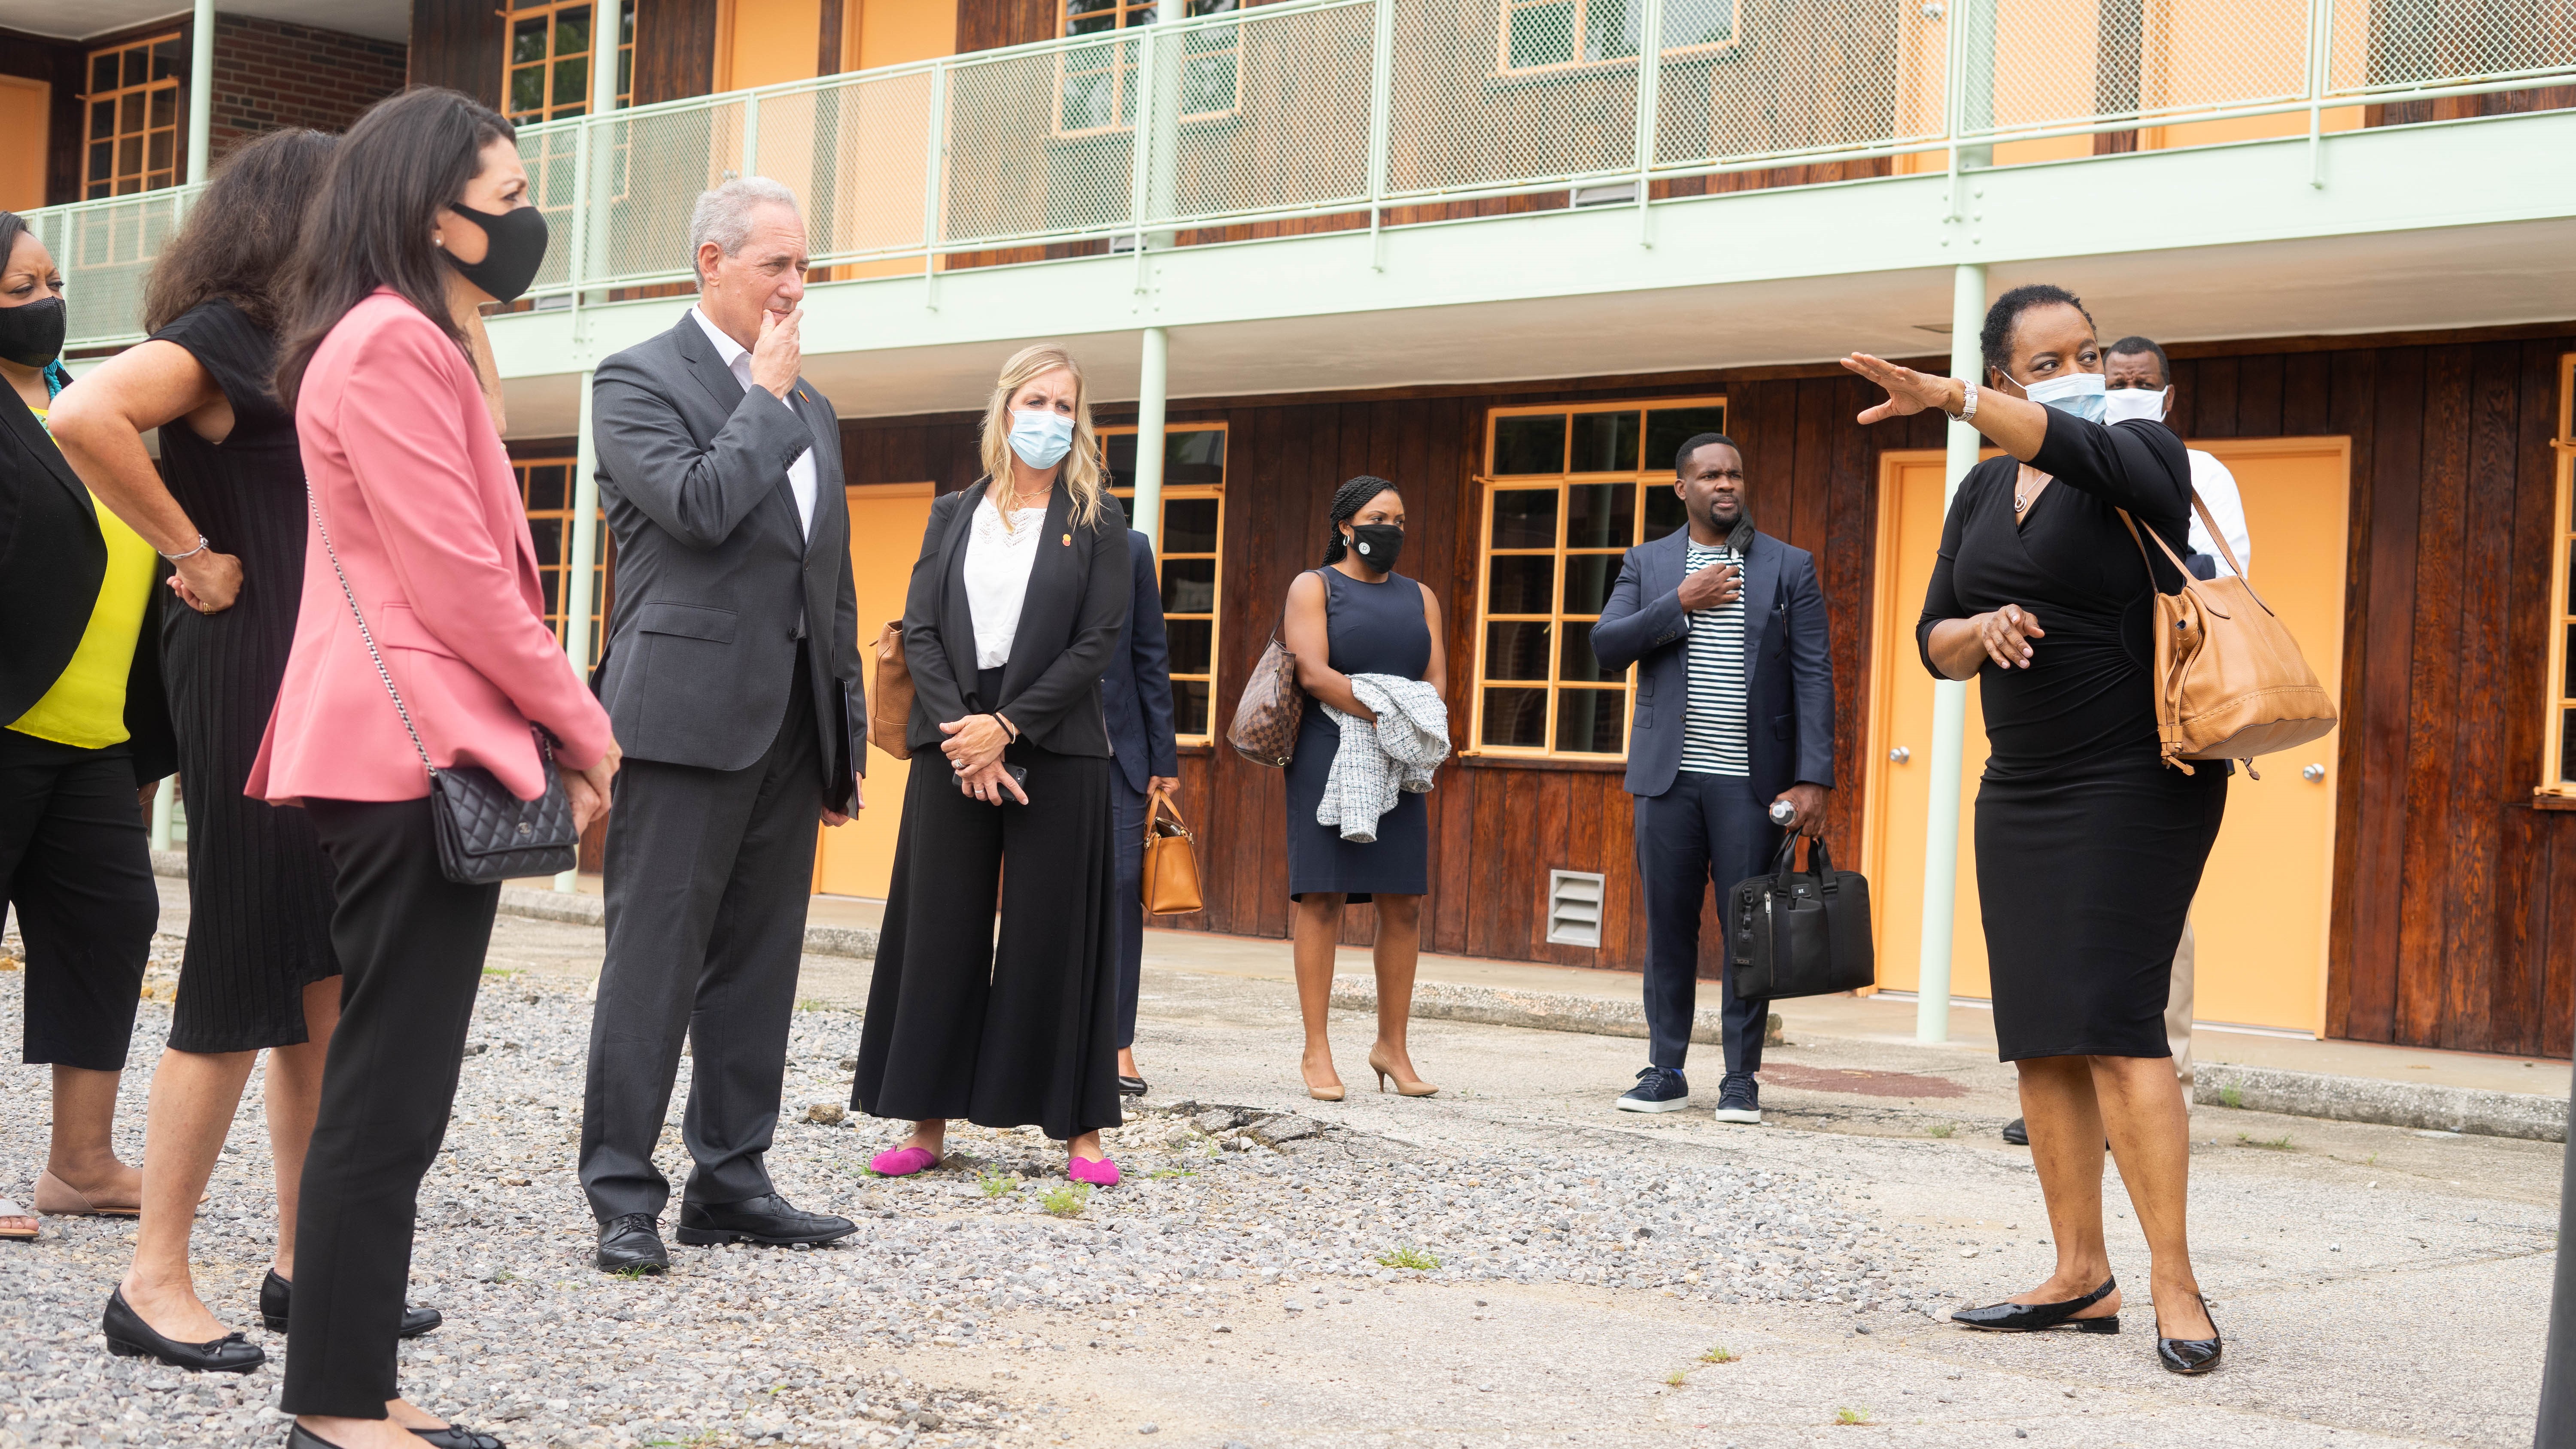 Denise Gilmore, right, shares the history of the Gaston Motel and the plans for its future with local leaders and Mastercard executives in early August. (Photo courtesy of Mastercard)